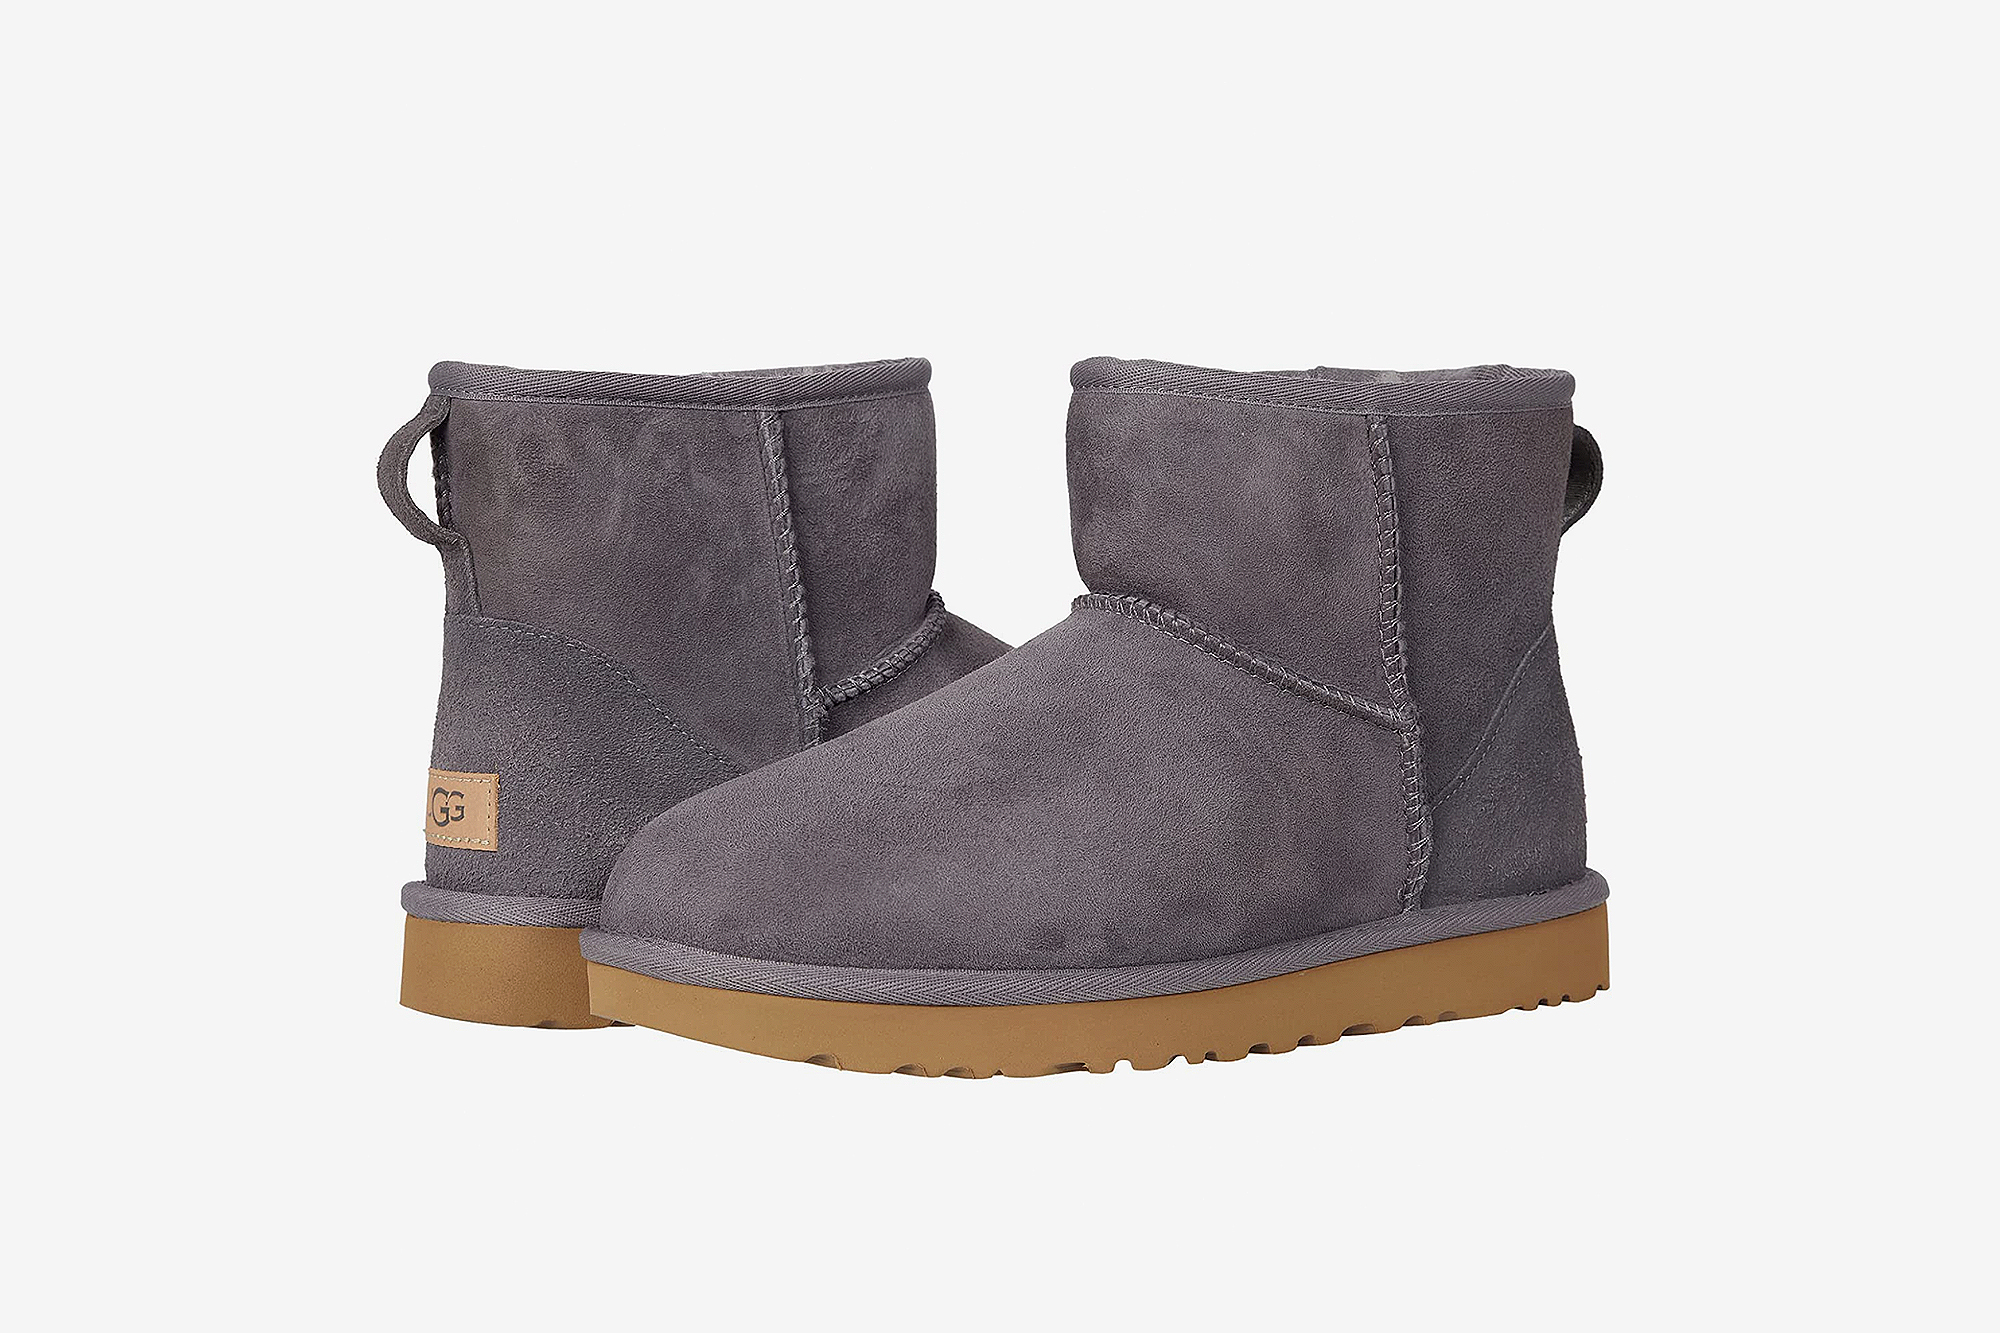 affix Verval Aanklager The UGG Boots That Celebs Love Are on Sale at Zappos — Shop Now